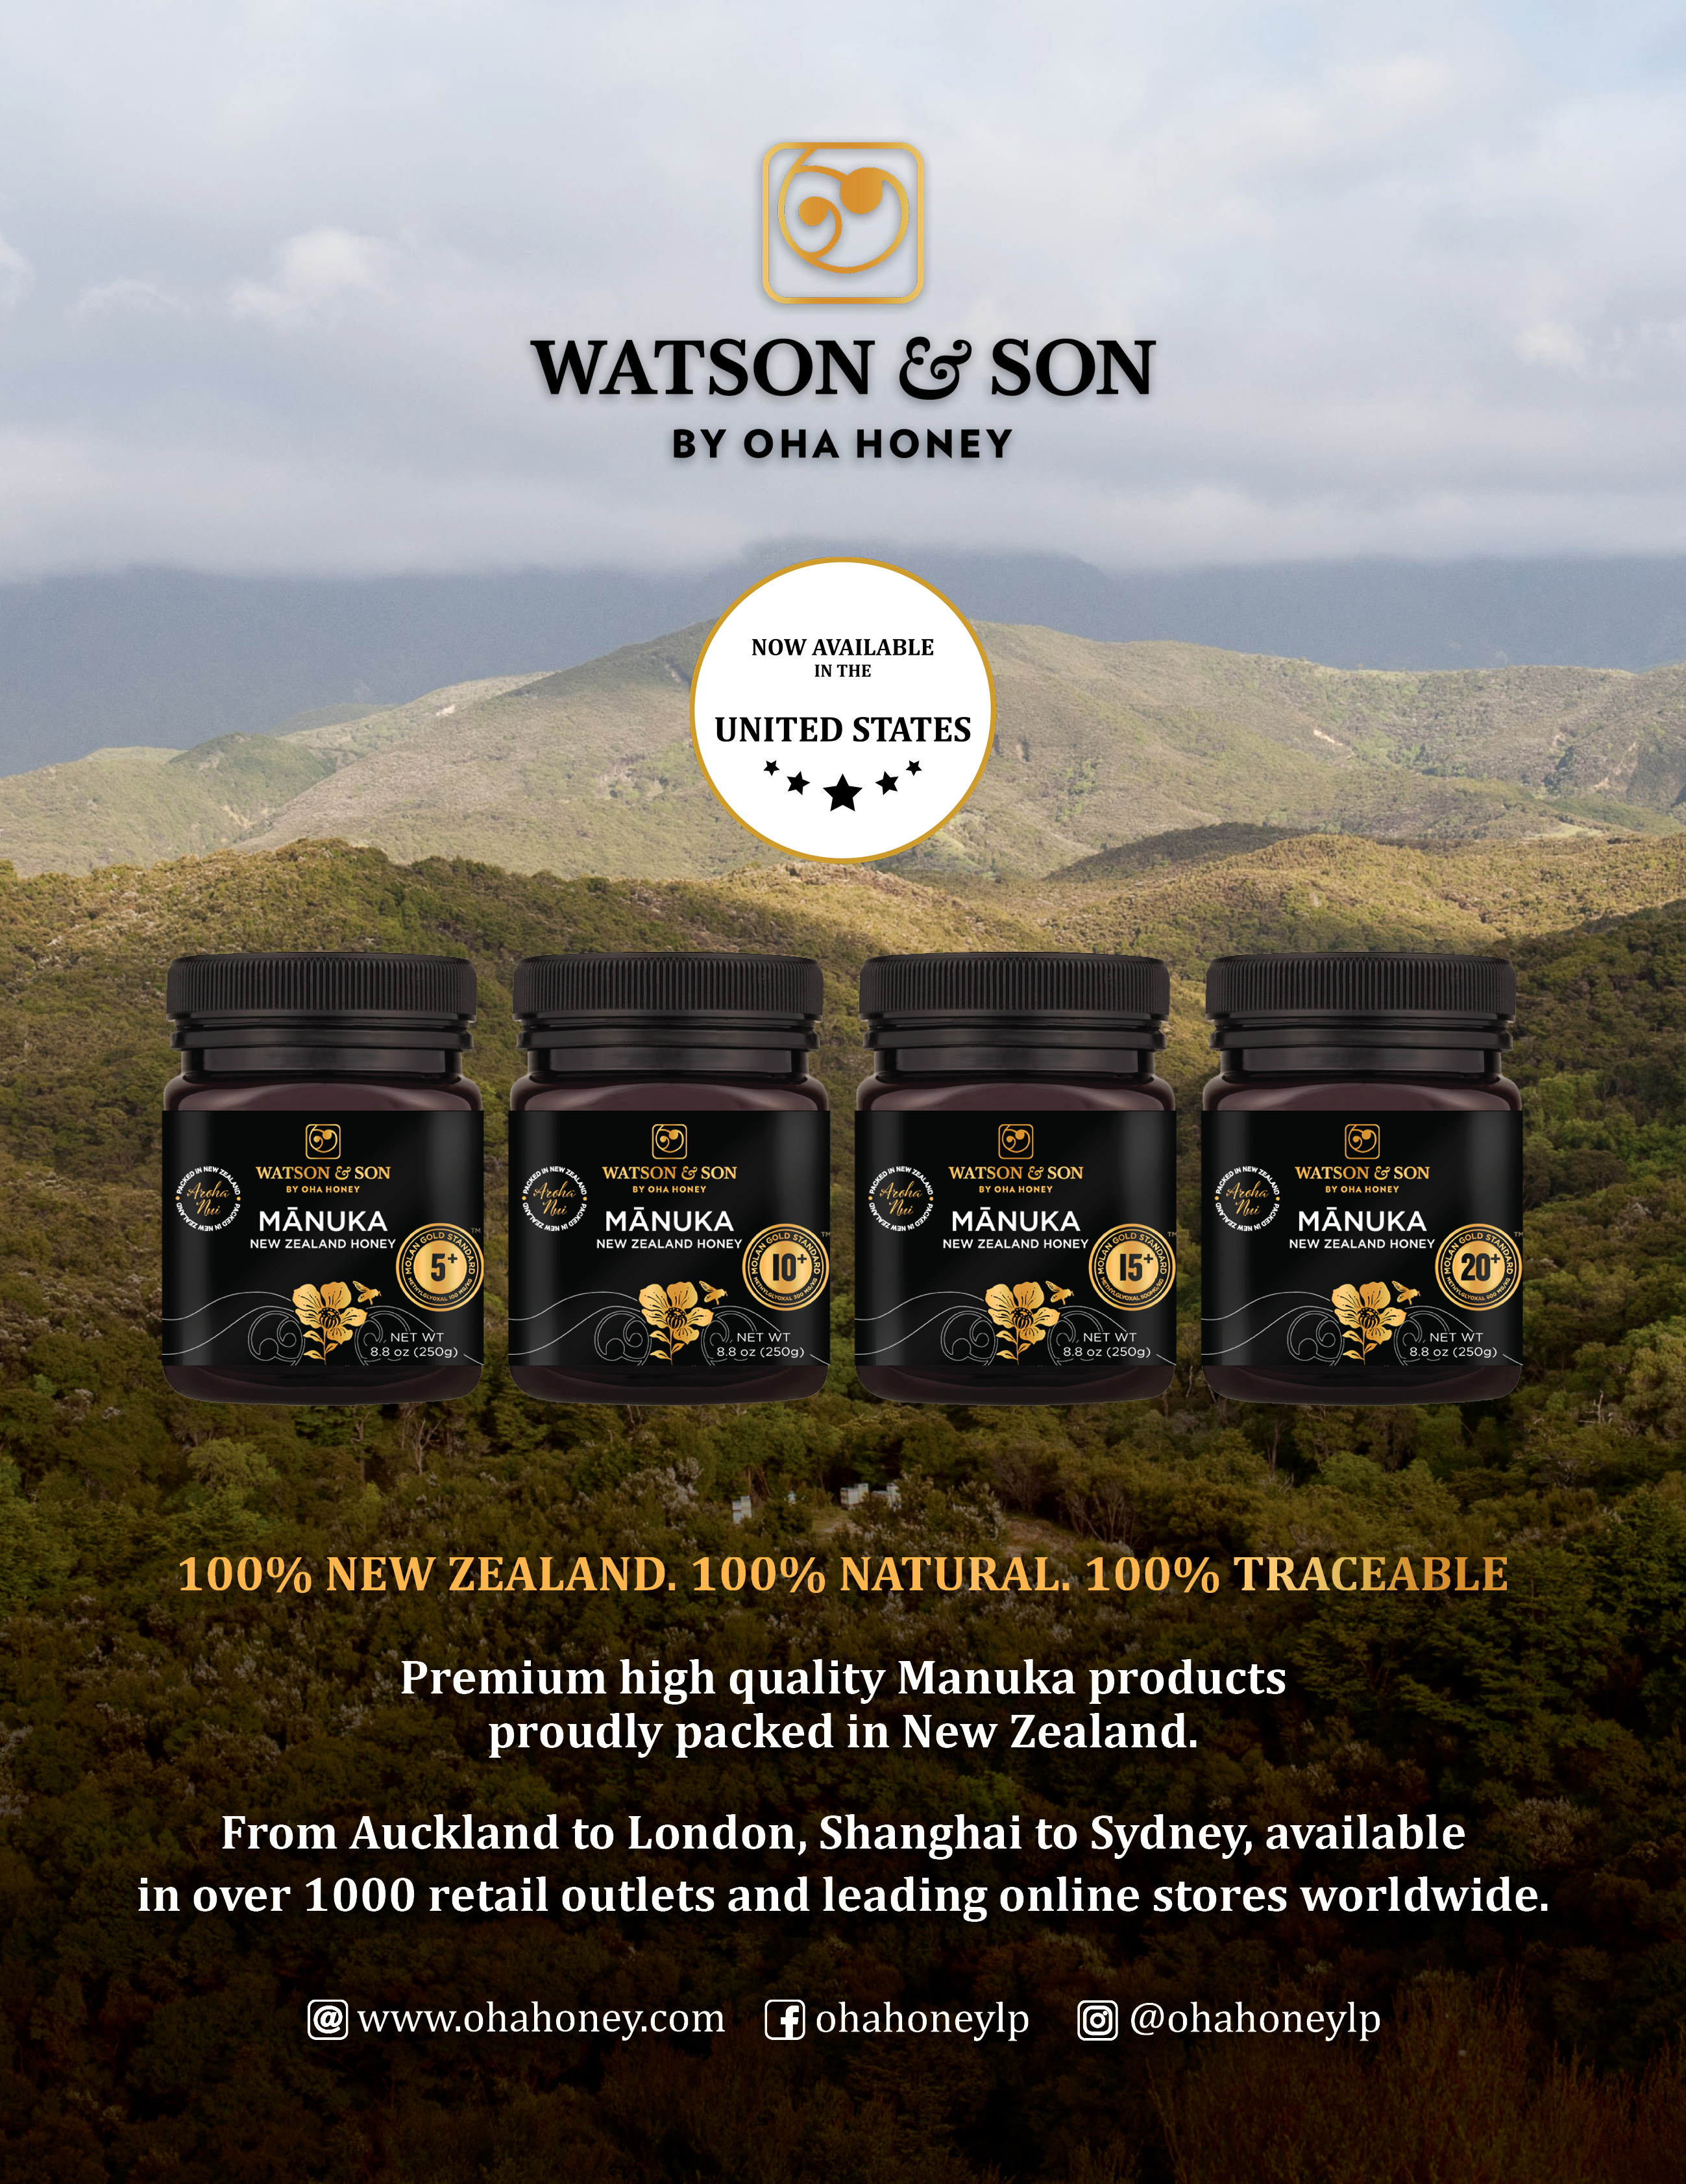 Watson & Son by Oha Honey plans to export to the United States four Manuka honey products based on their methylglyoxal levels:  1) Manuka New Zealand Honey 5+, which has at least 100 mg/kg of methylglyoxal 2) Manuka New Zealand Honey 10+, which has at least 300 mg/kg of methylglyoxal 3) Manuka New Zealand Honey 15+, which has at least 500 mg/kg of methylglyoxal 4) Manuka New Zealand Honey 20+, which has 800 mg/kg of methylglyoxal